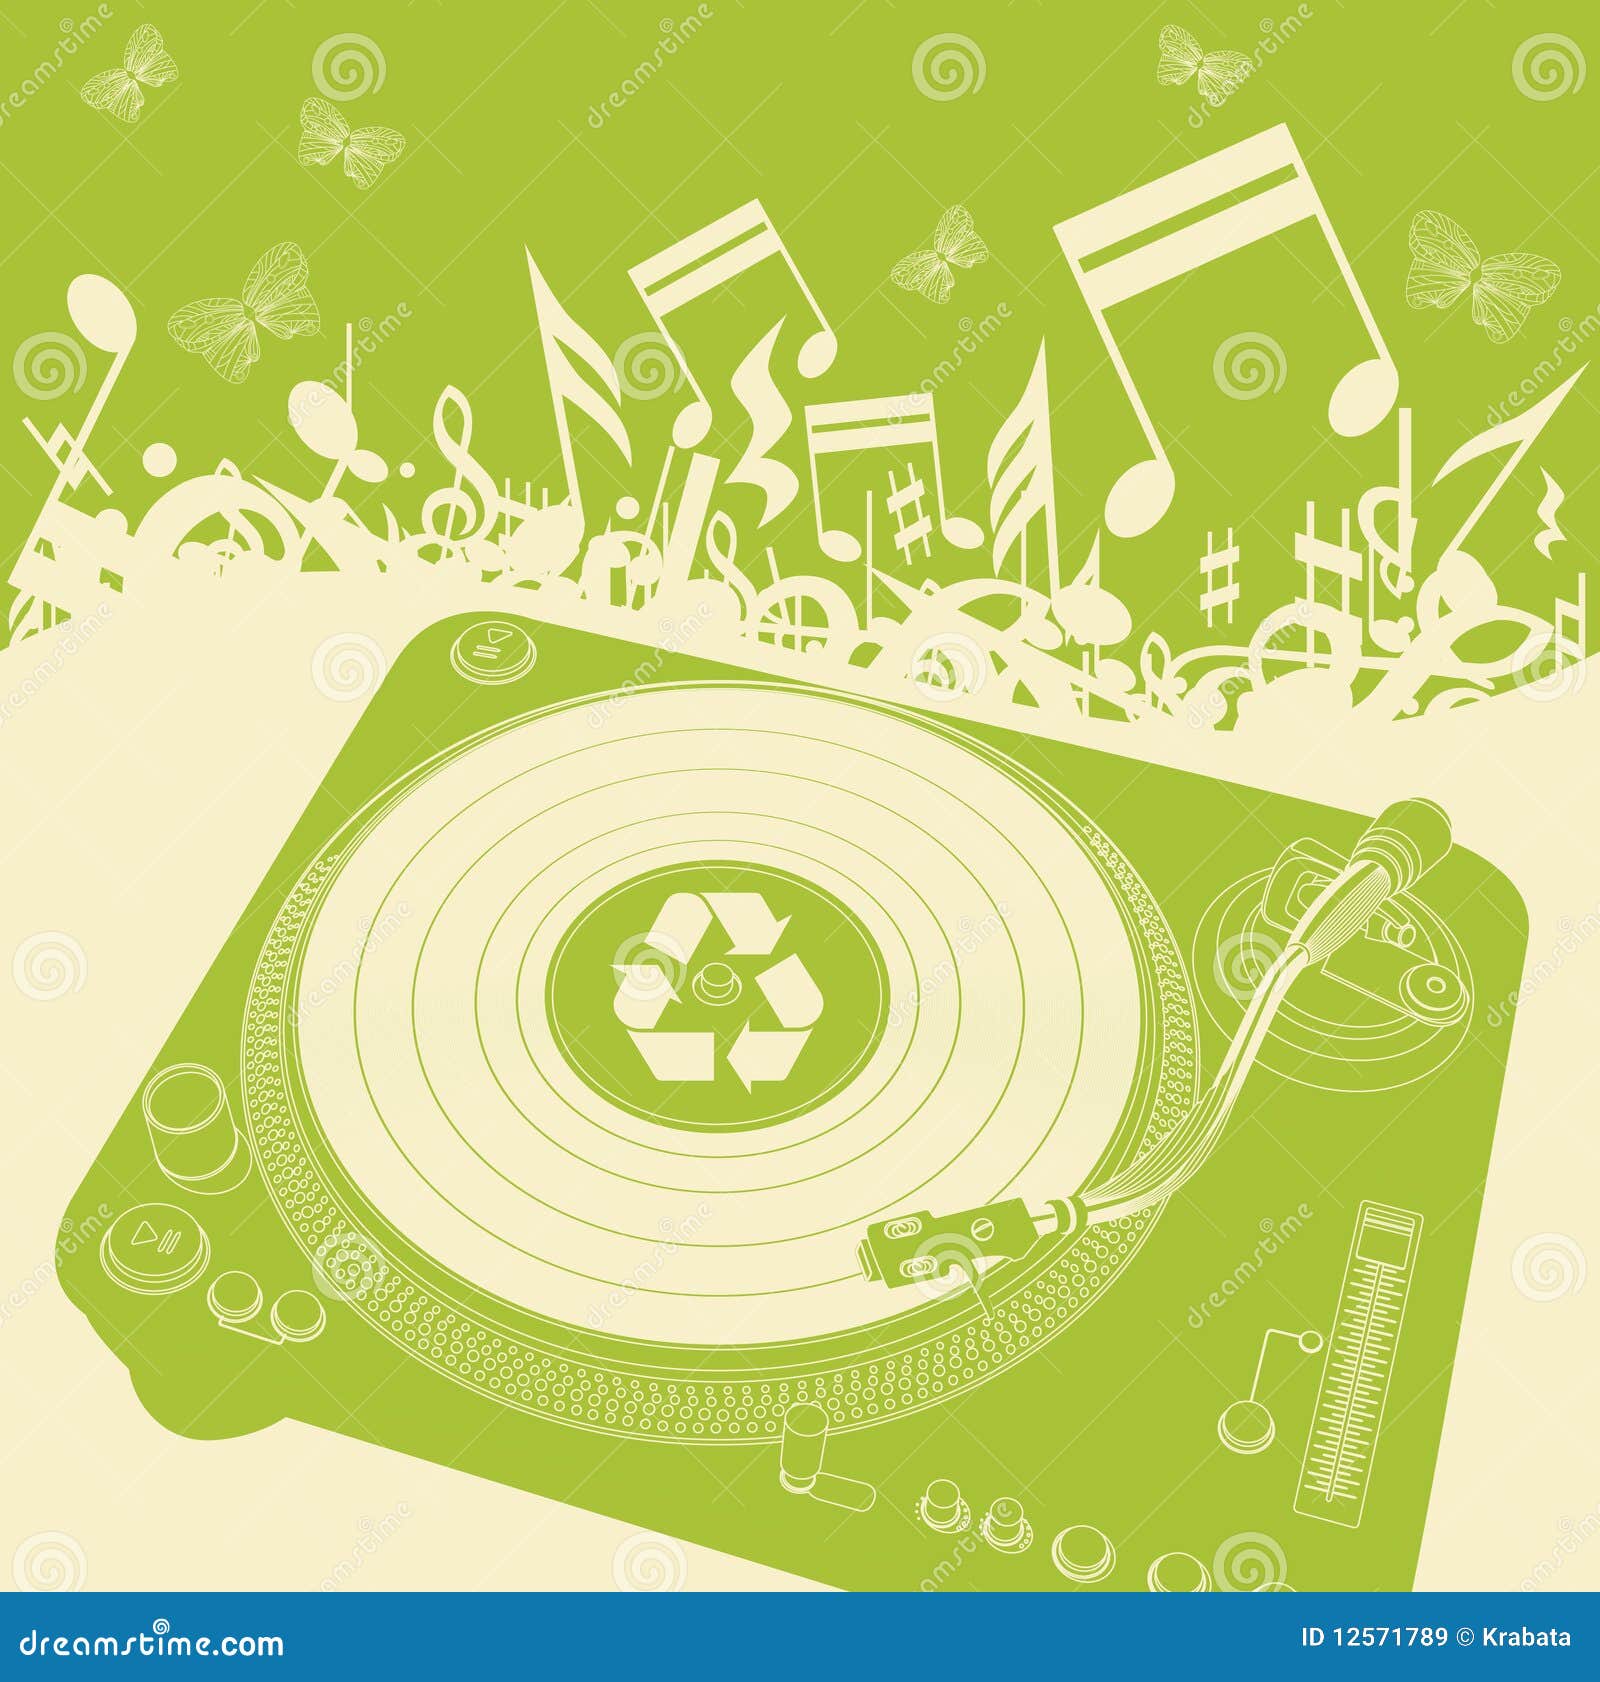 Eco Music Background Vector Stock Vector Illustration of event